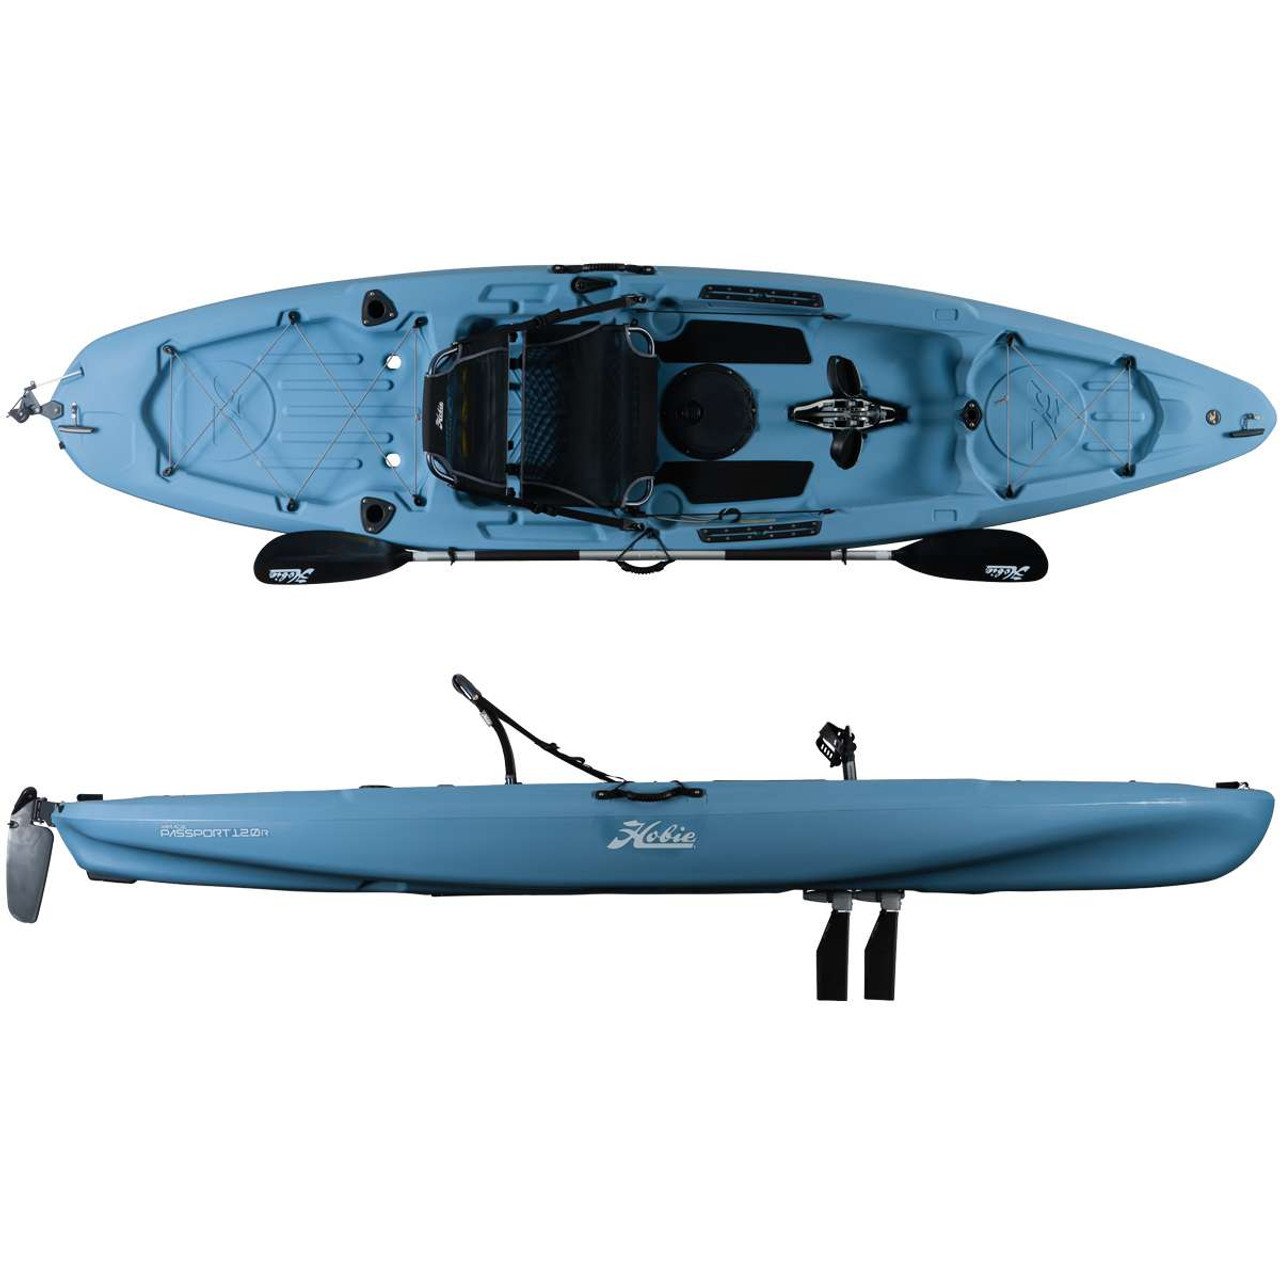 Hobie Passport 12 R Sit On Top Pedal Kayak with Paddle